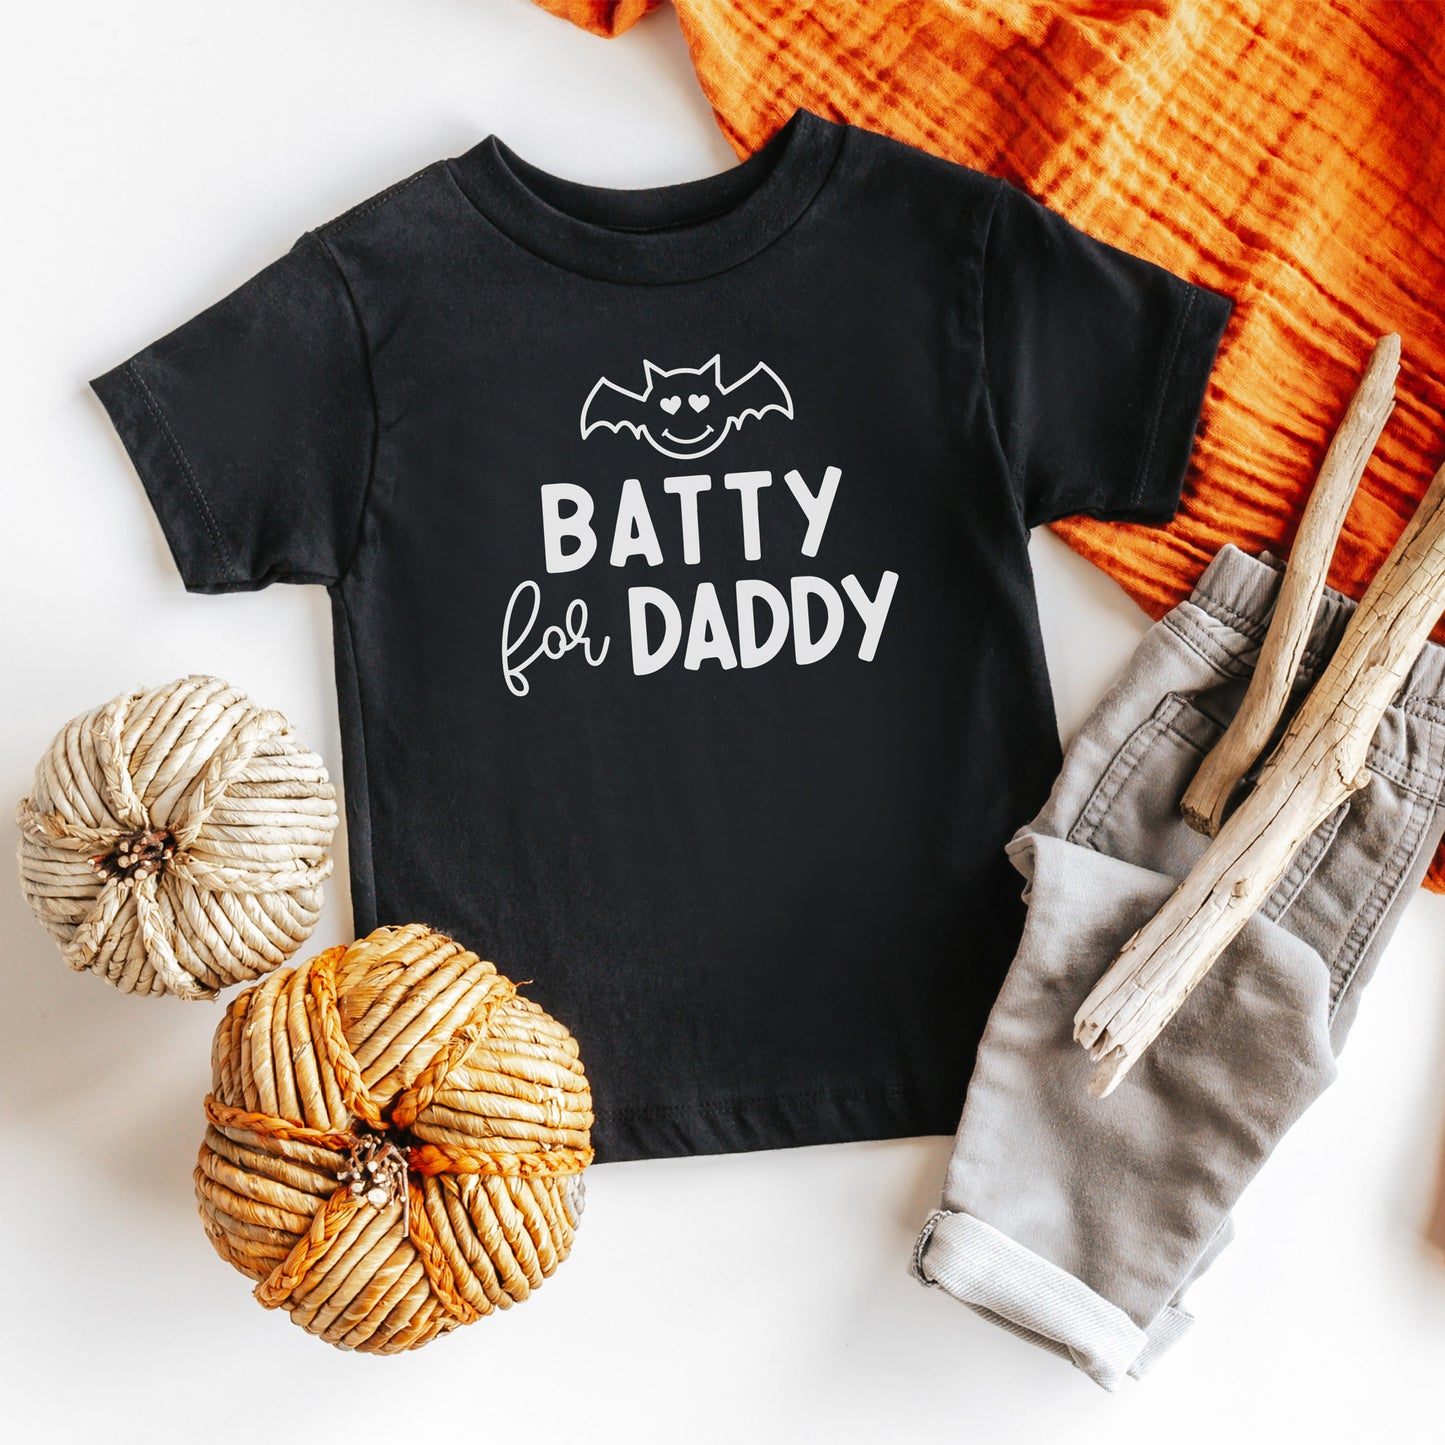 Batty for daddy halloween kids tees, shown in black